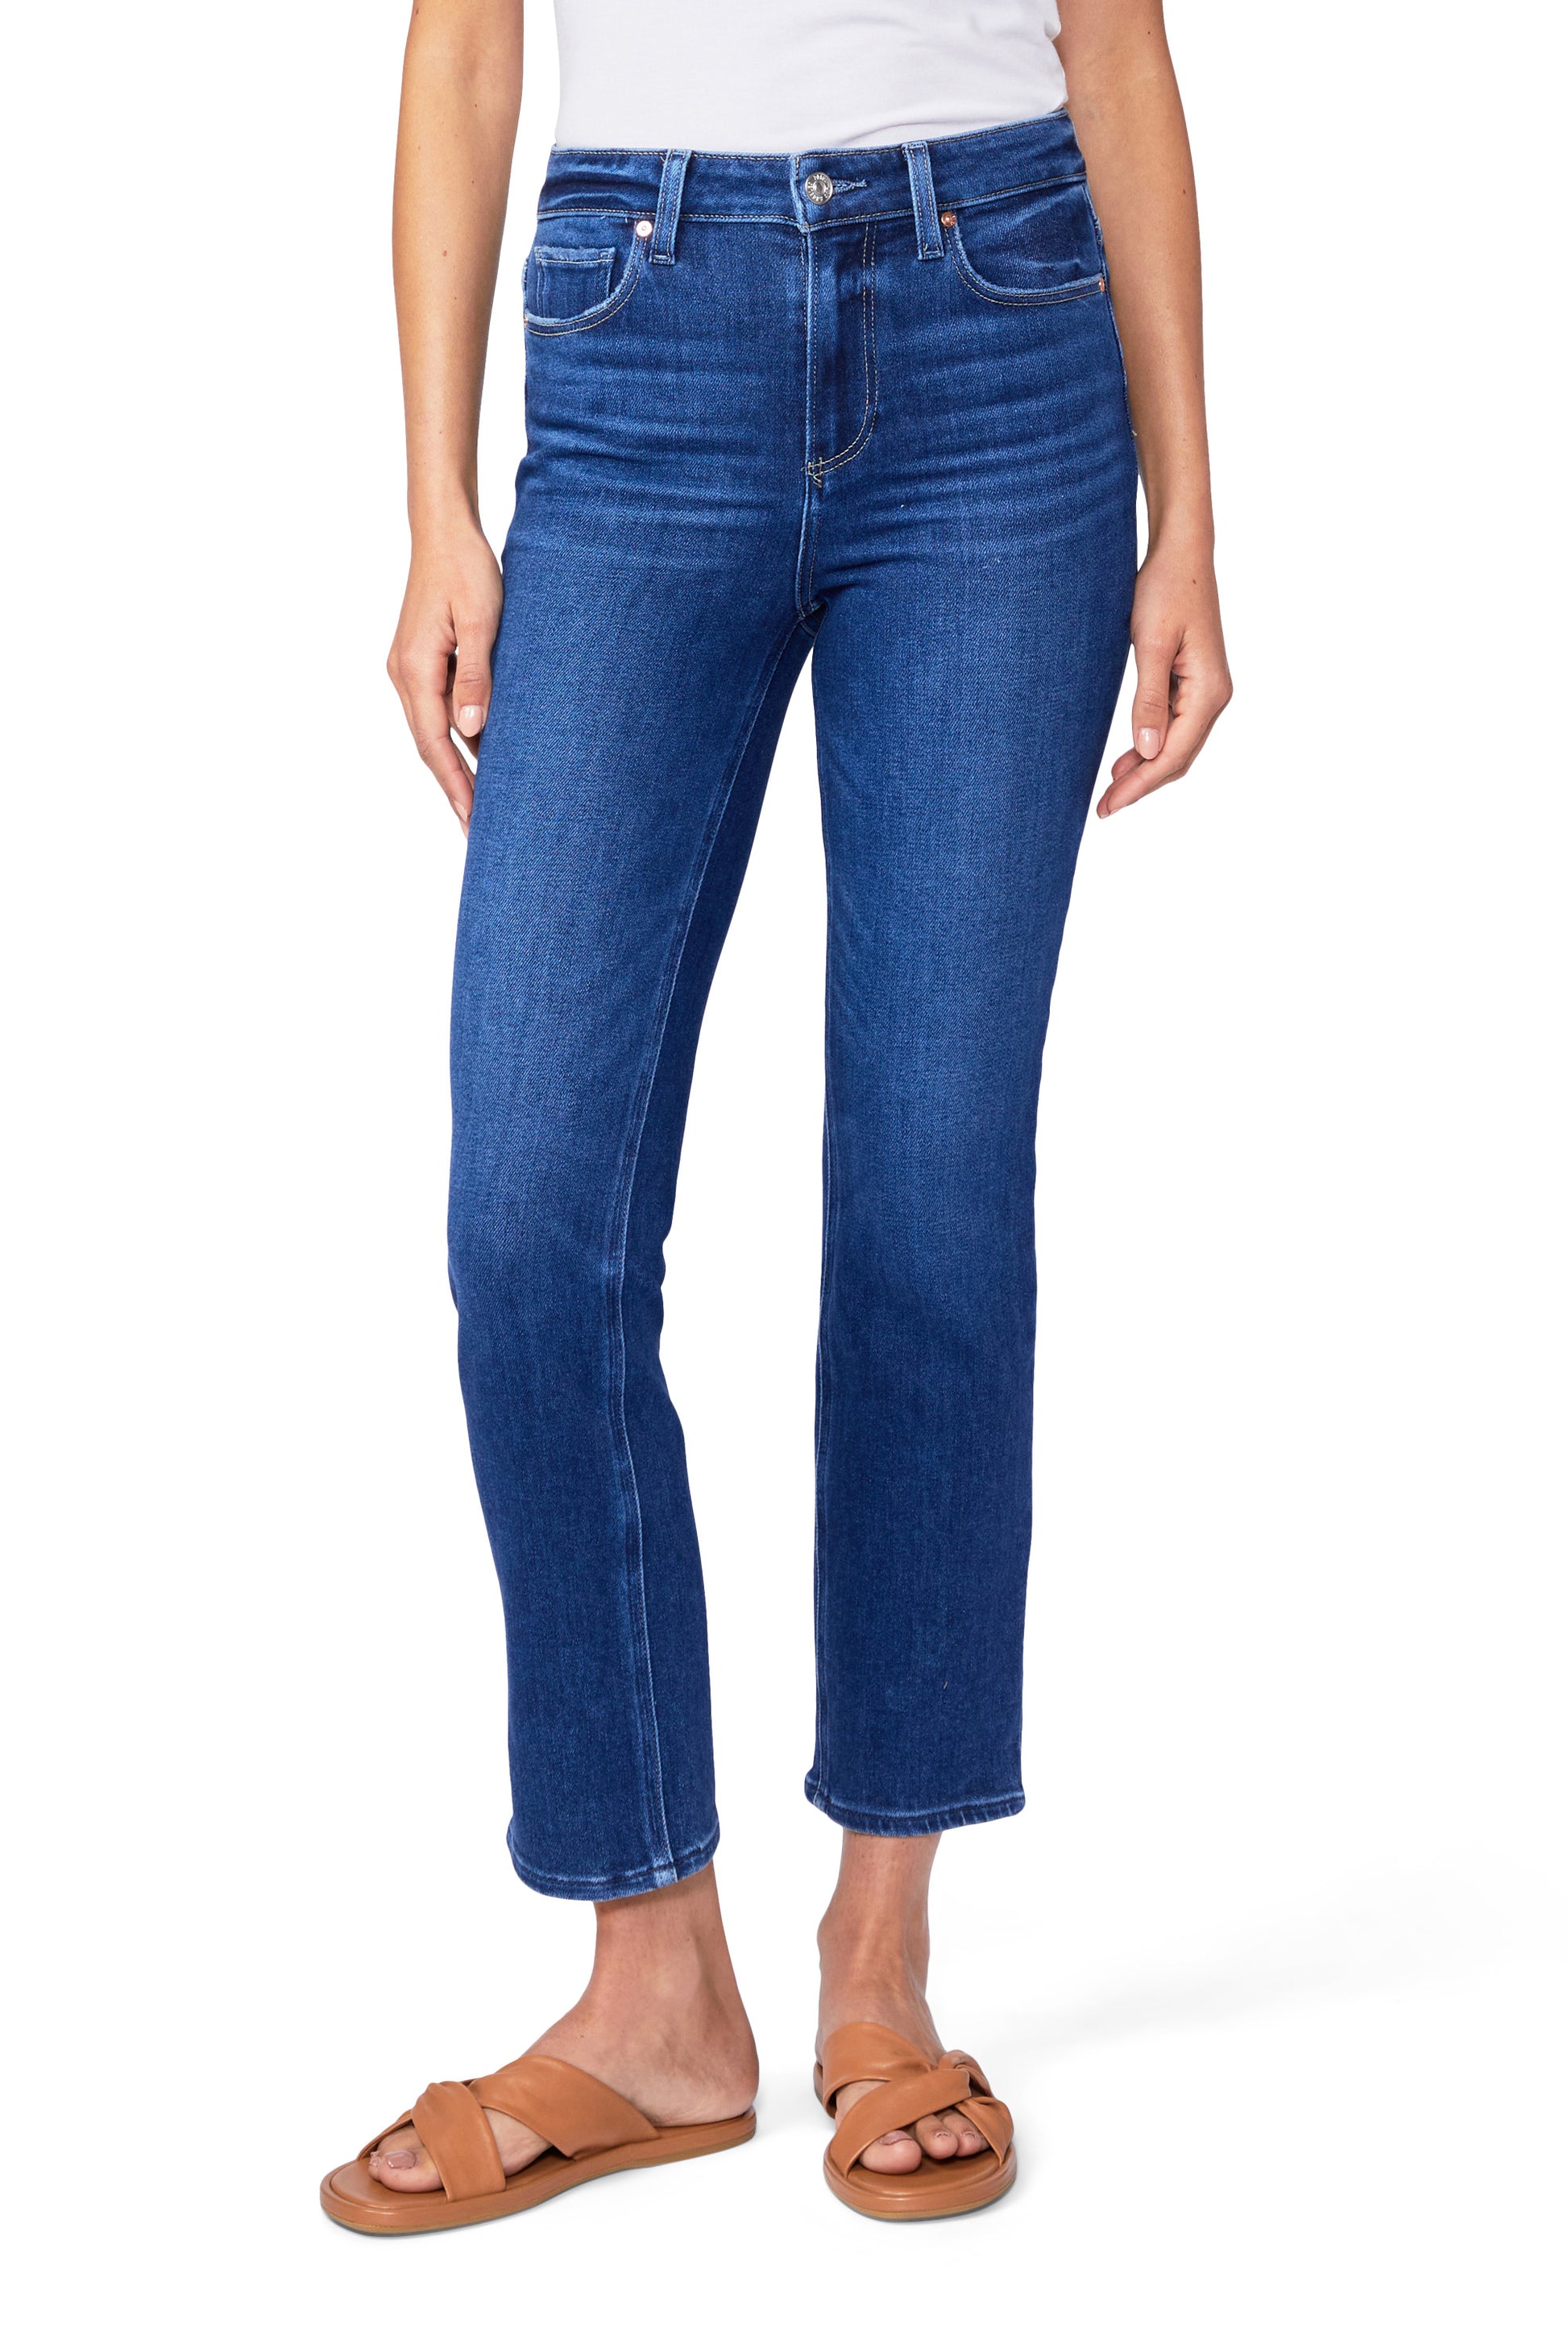 A woman is wearing a pair of Paige Cindy Straight Ankle - Soleil jeans.